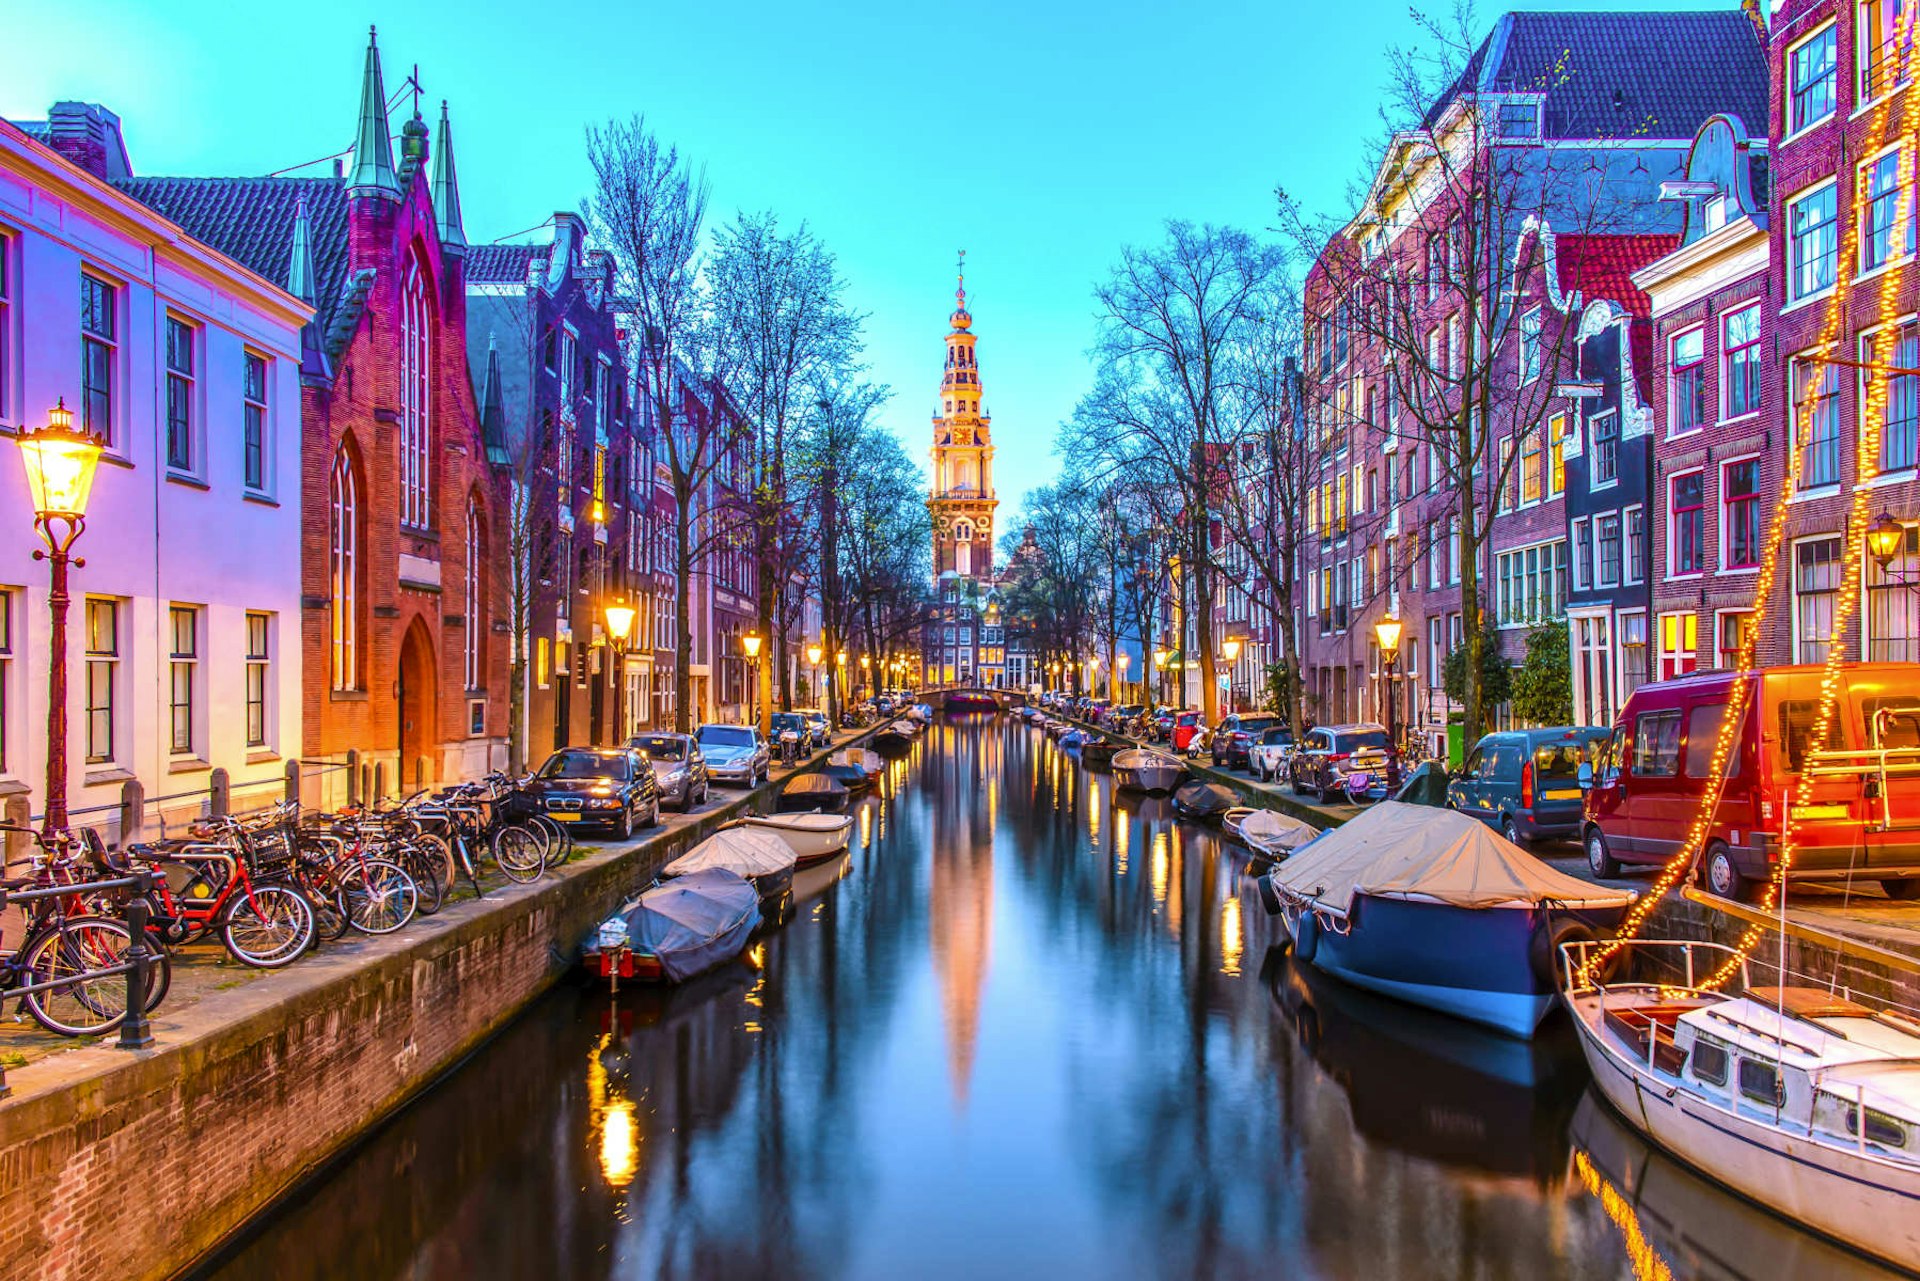 A view of a canal in Amsterdam by night.